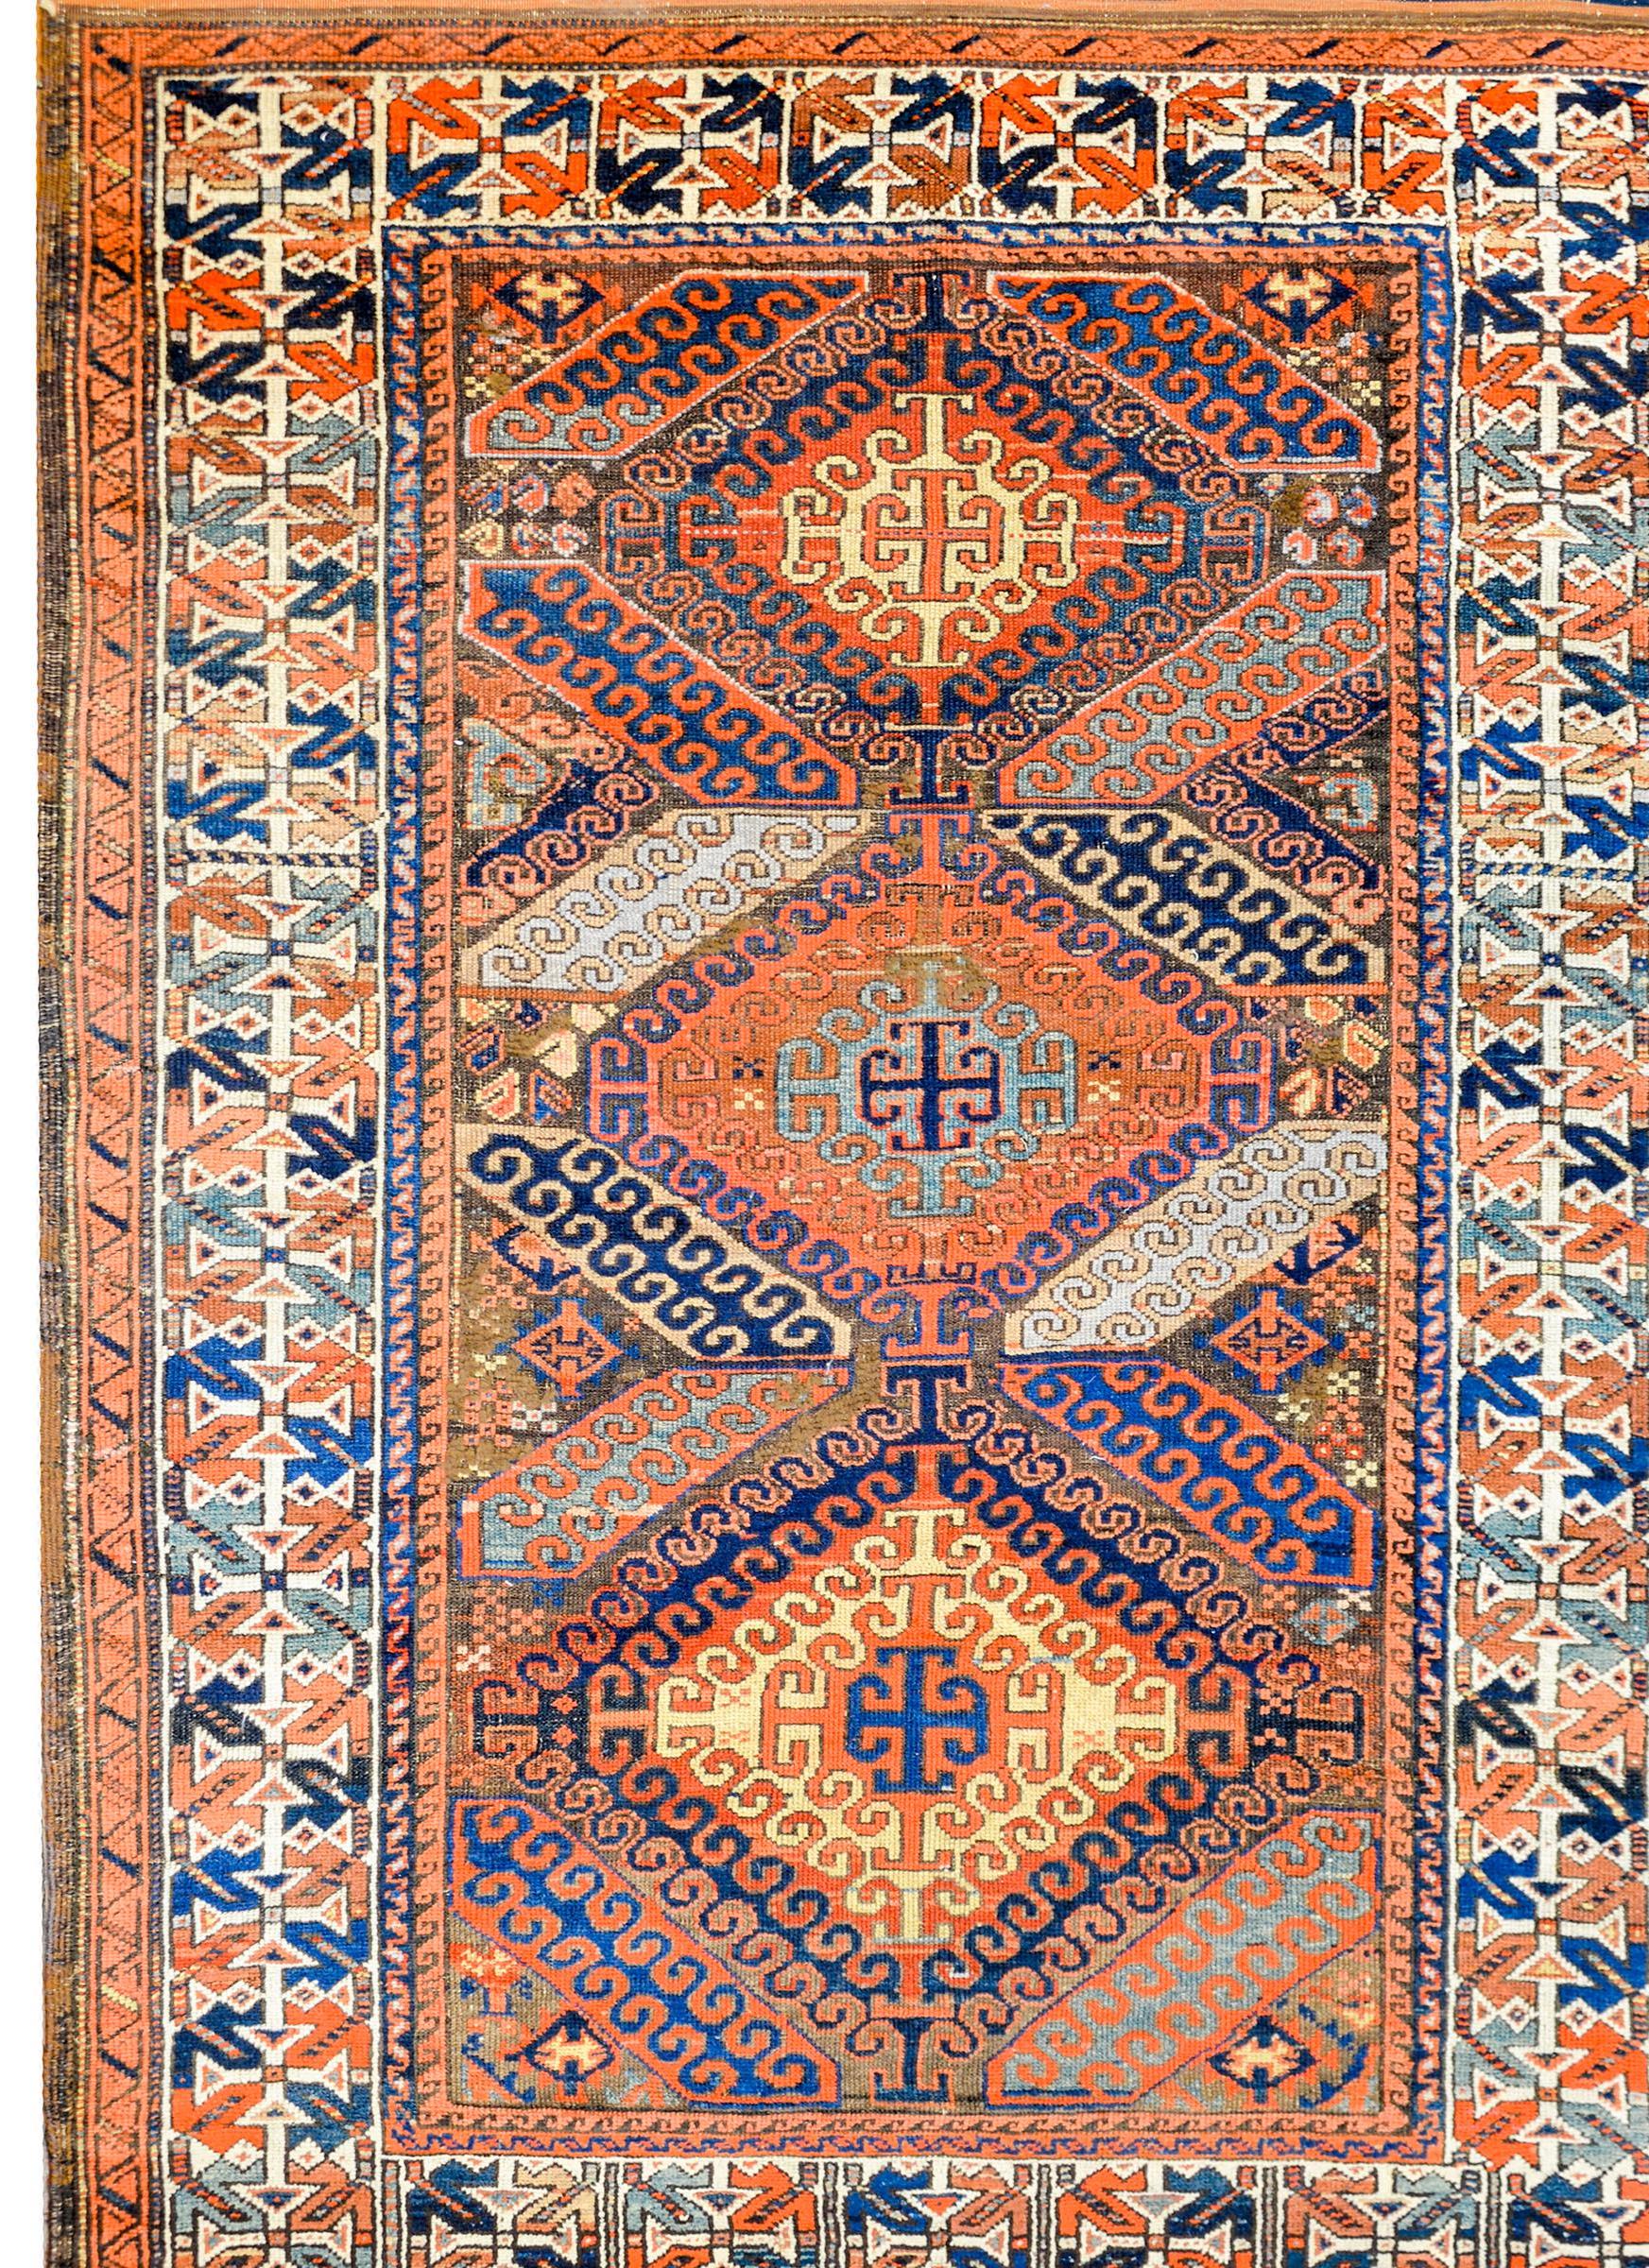 An early 20th century Persian Baluch rug with an incredible tribal pattern containing three large diamond medallions with scrolled stylized vines and woven in crimson, light and dark indigo, gold, and brown vegetable dyed wool. The border is